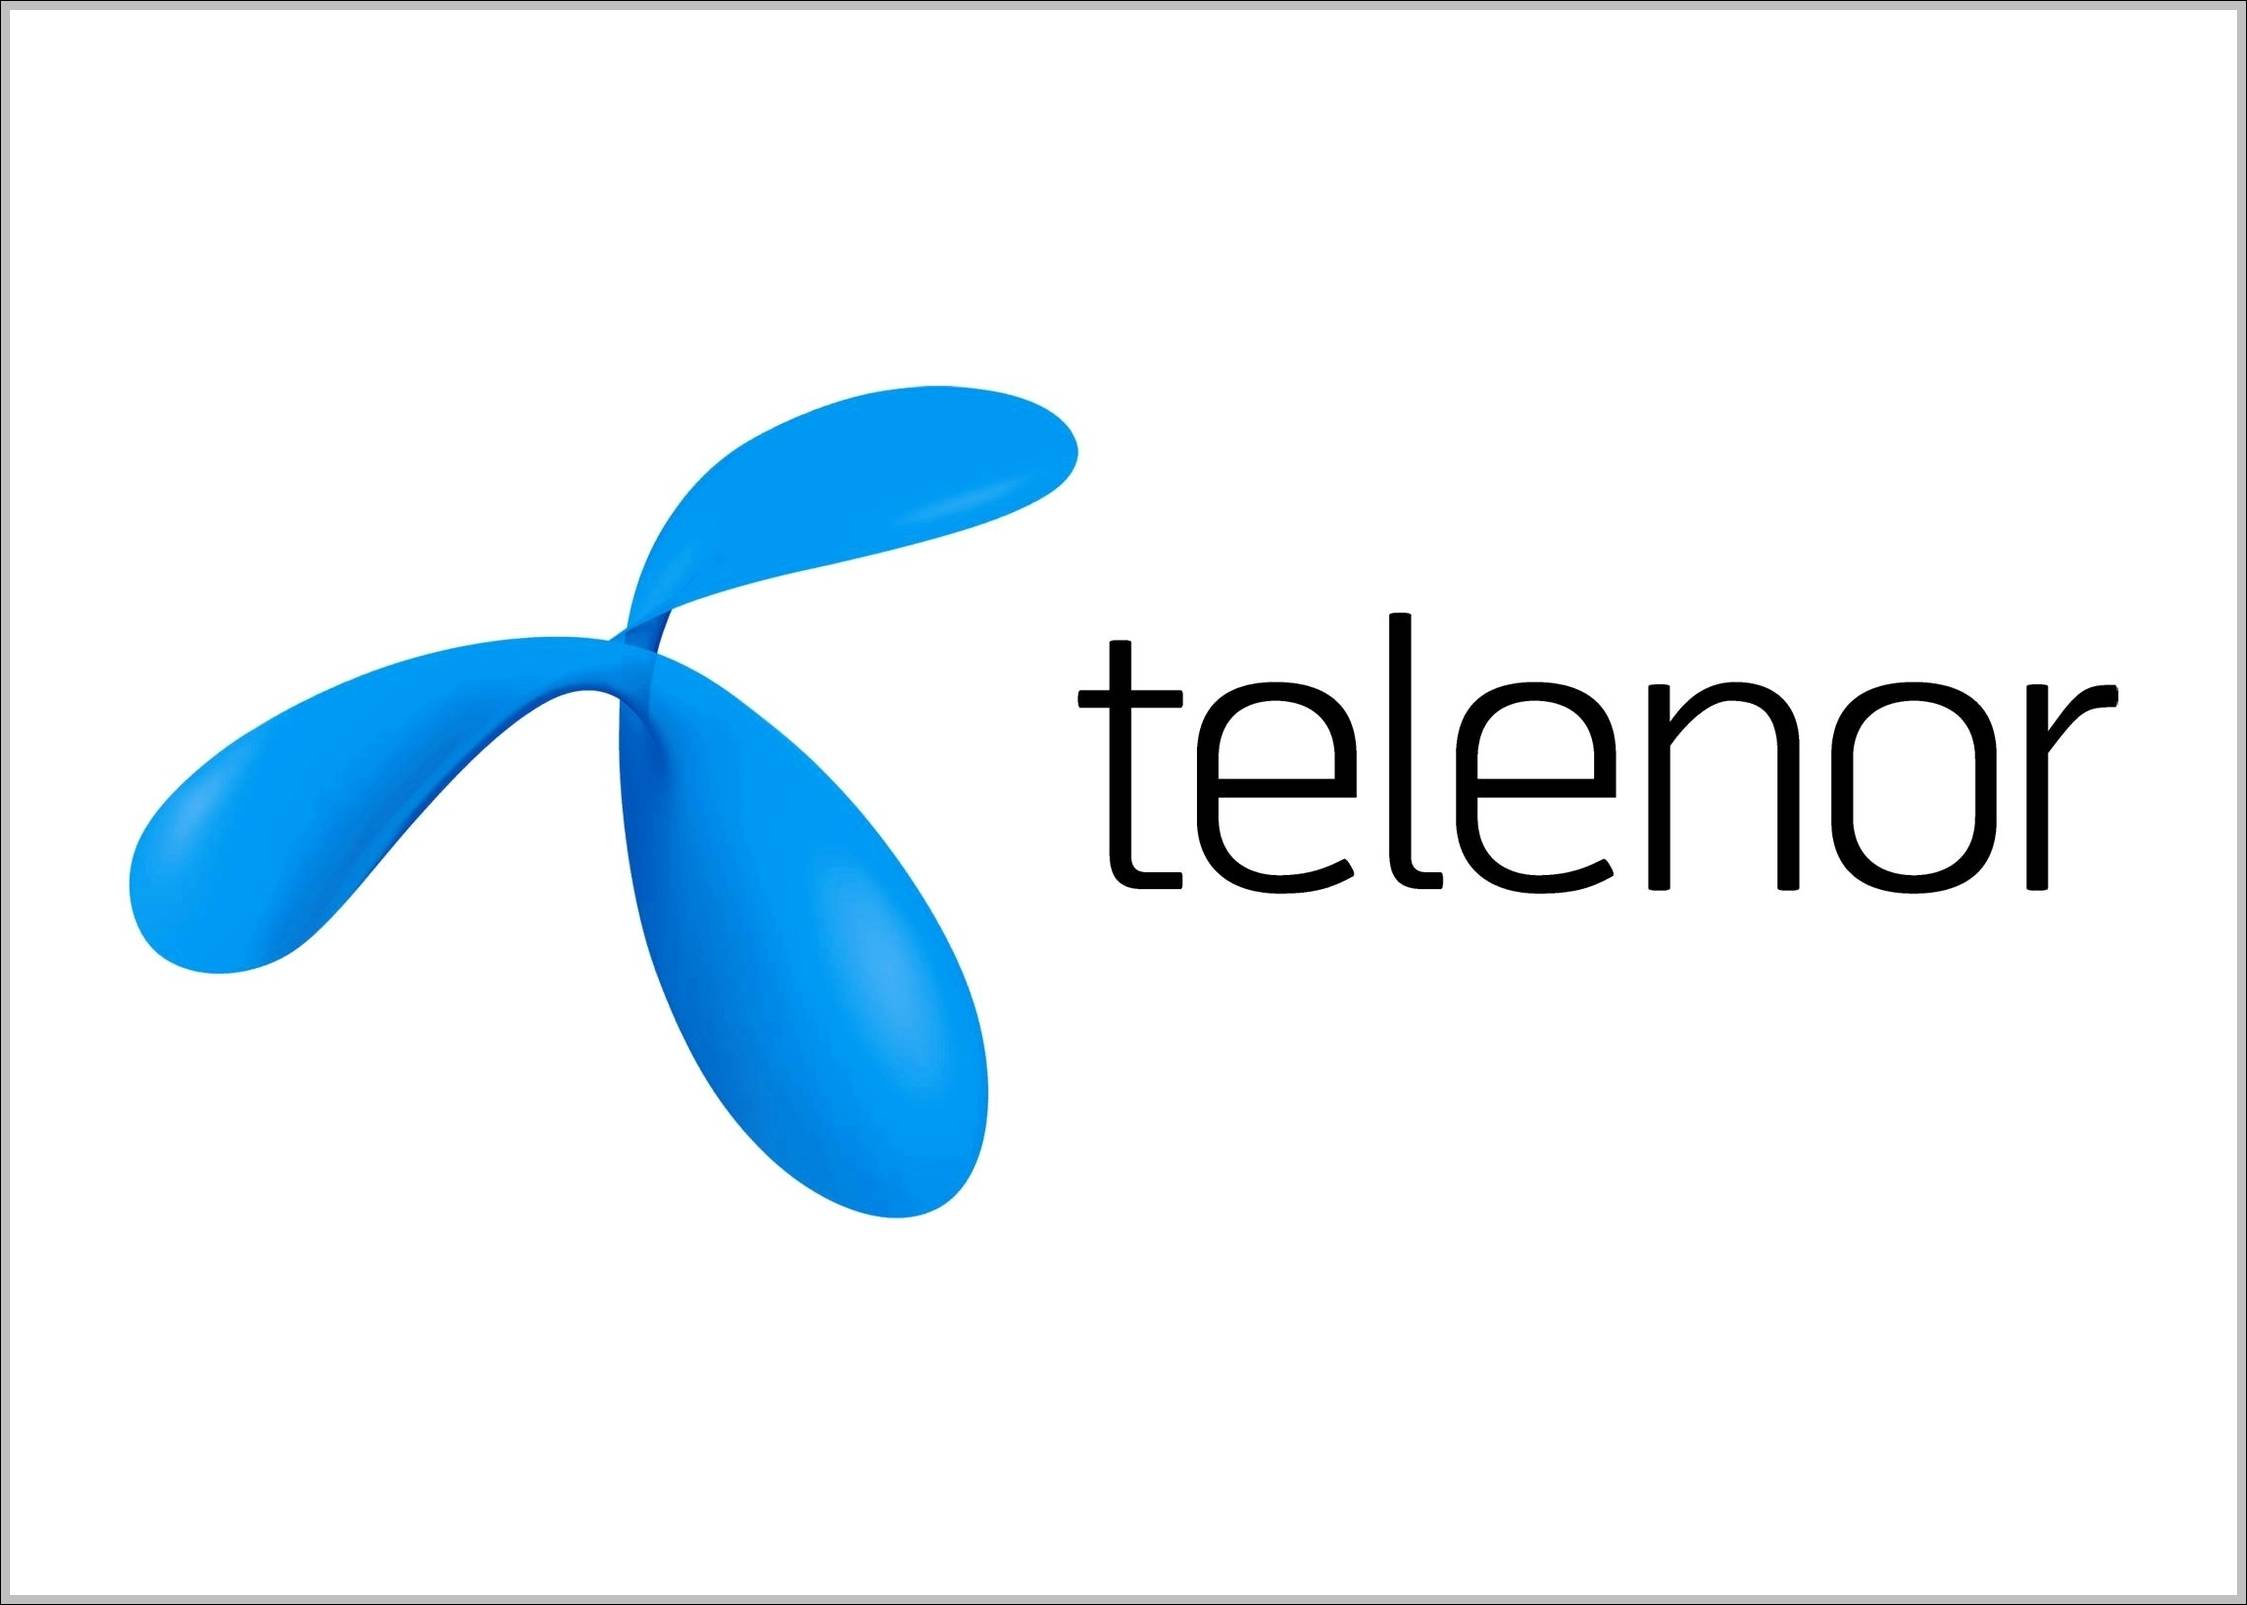 Telenor logo and sign